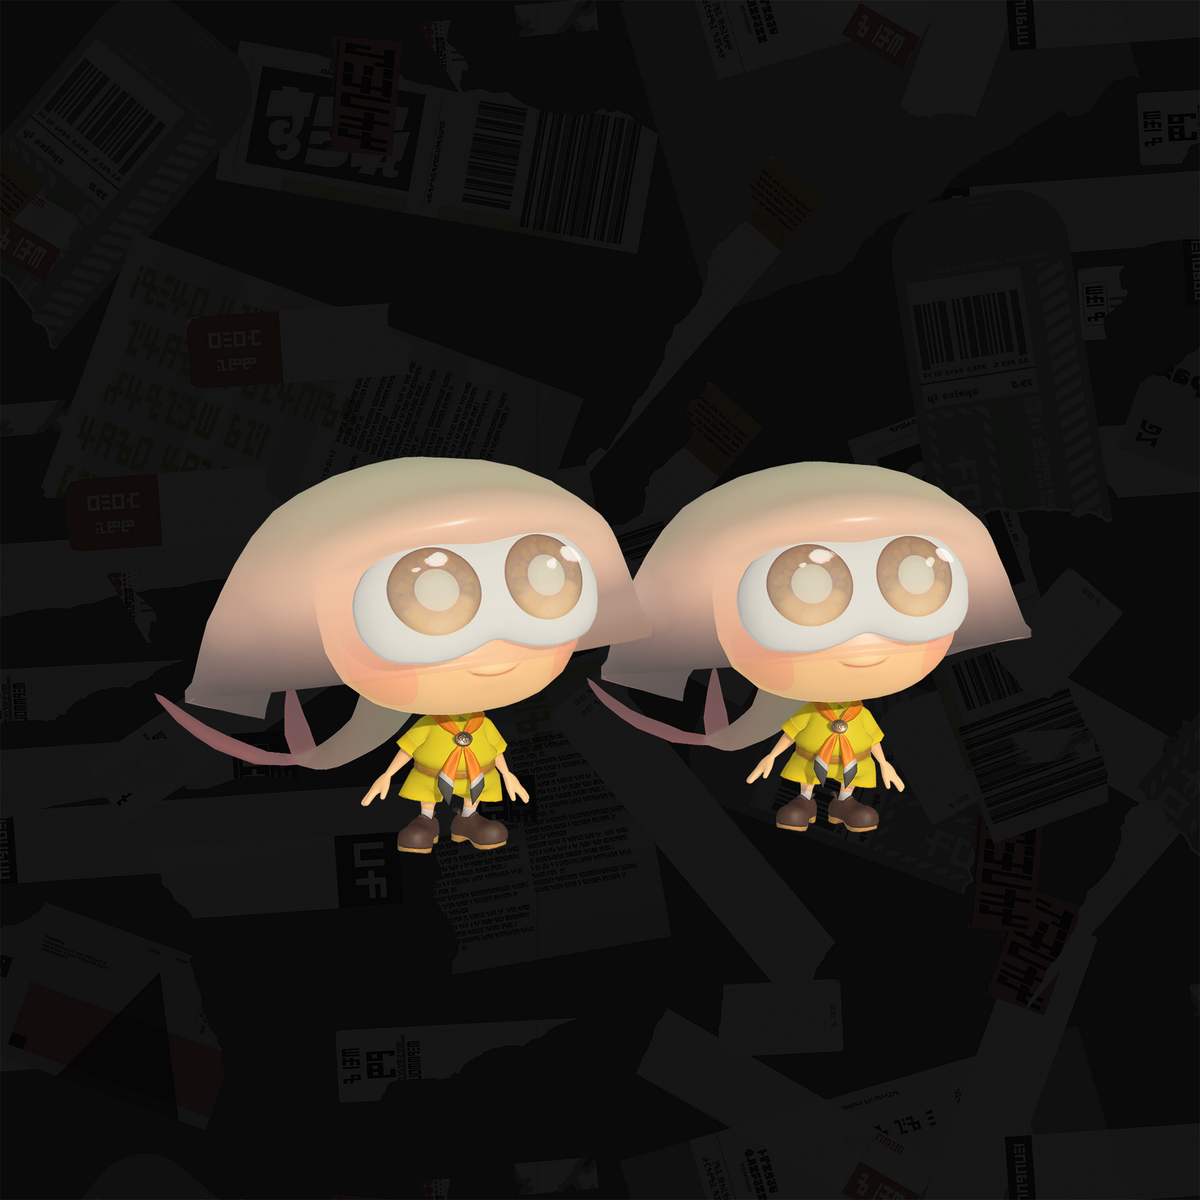 1200px-S3_Shelly_and_Donny_Render.png